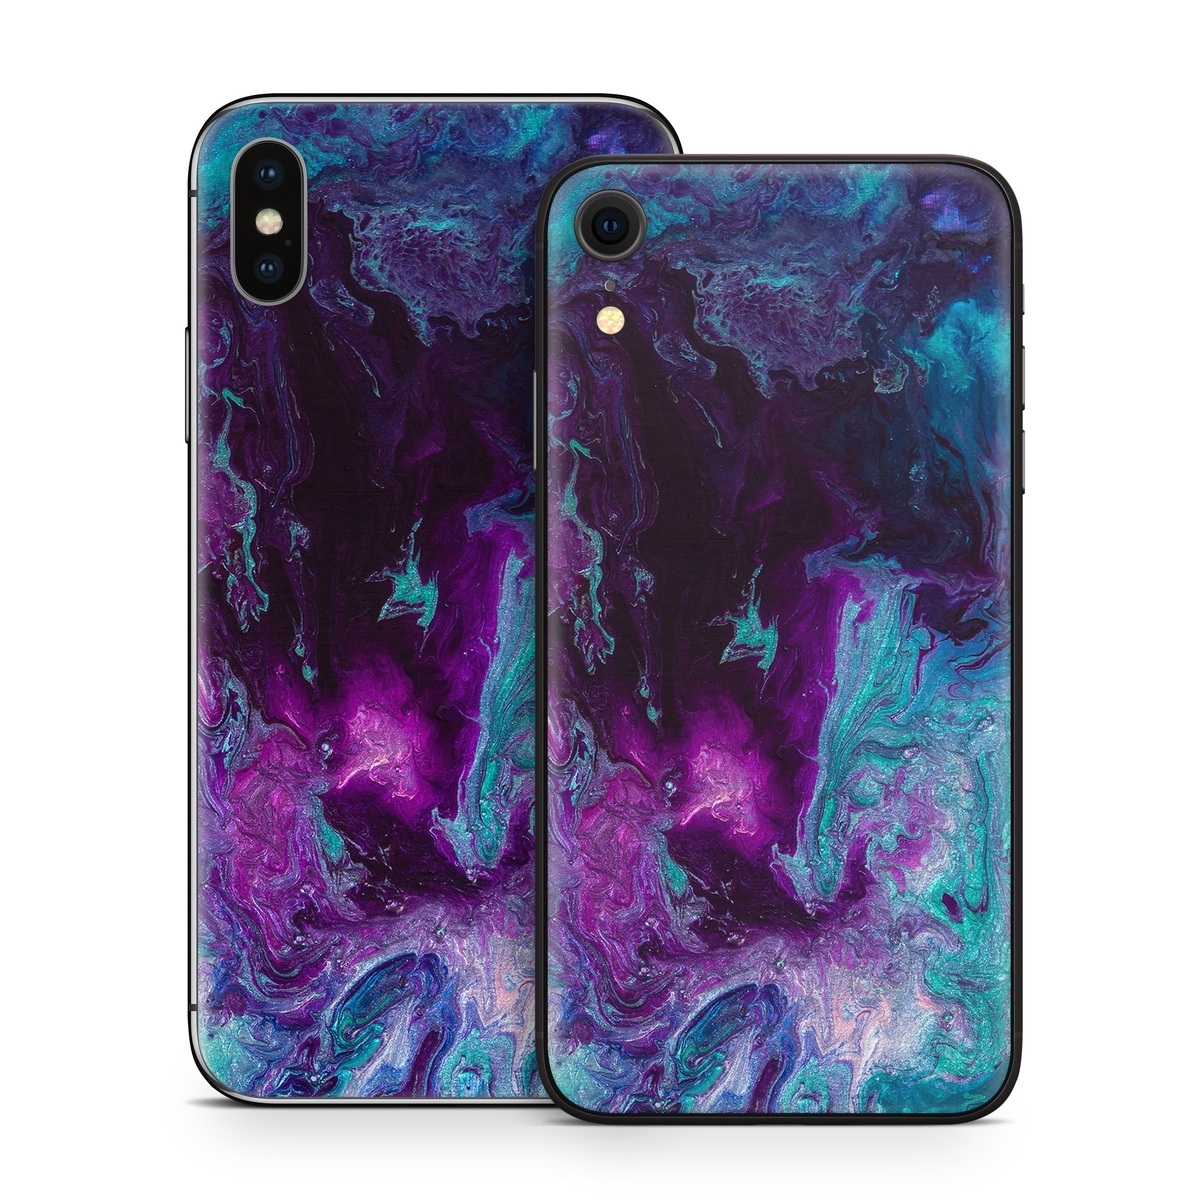 iPhone X Series Skin design of Blue, Purple, Violet, Water, Turquoise, Aqua, Pink, Magenta, Teal, Electric blue, with blue, purple, black colors